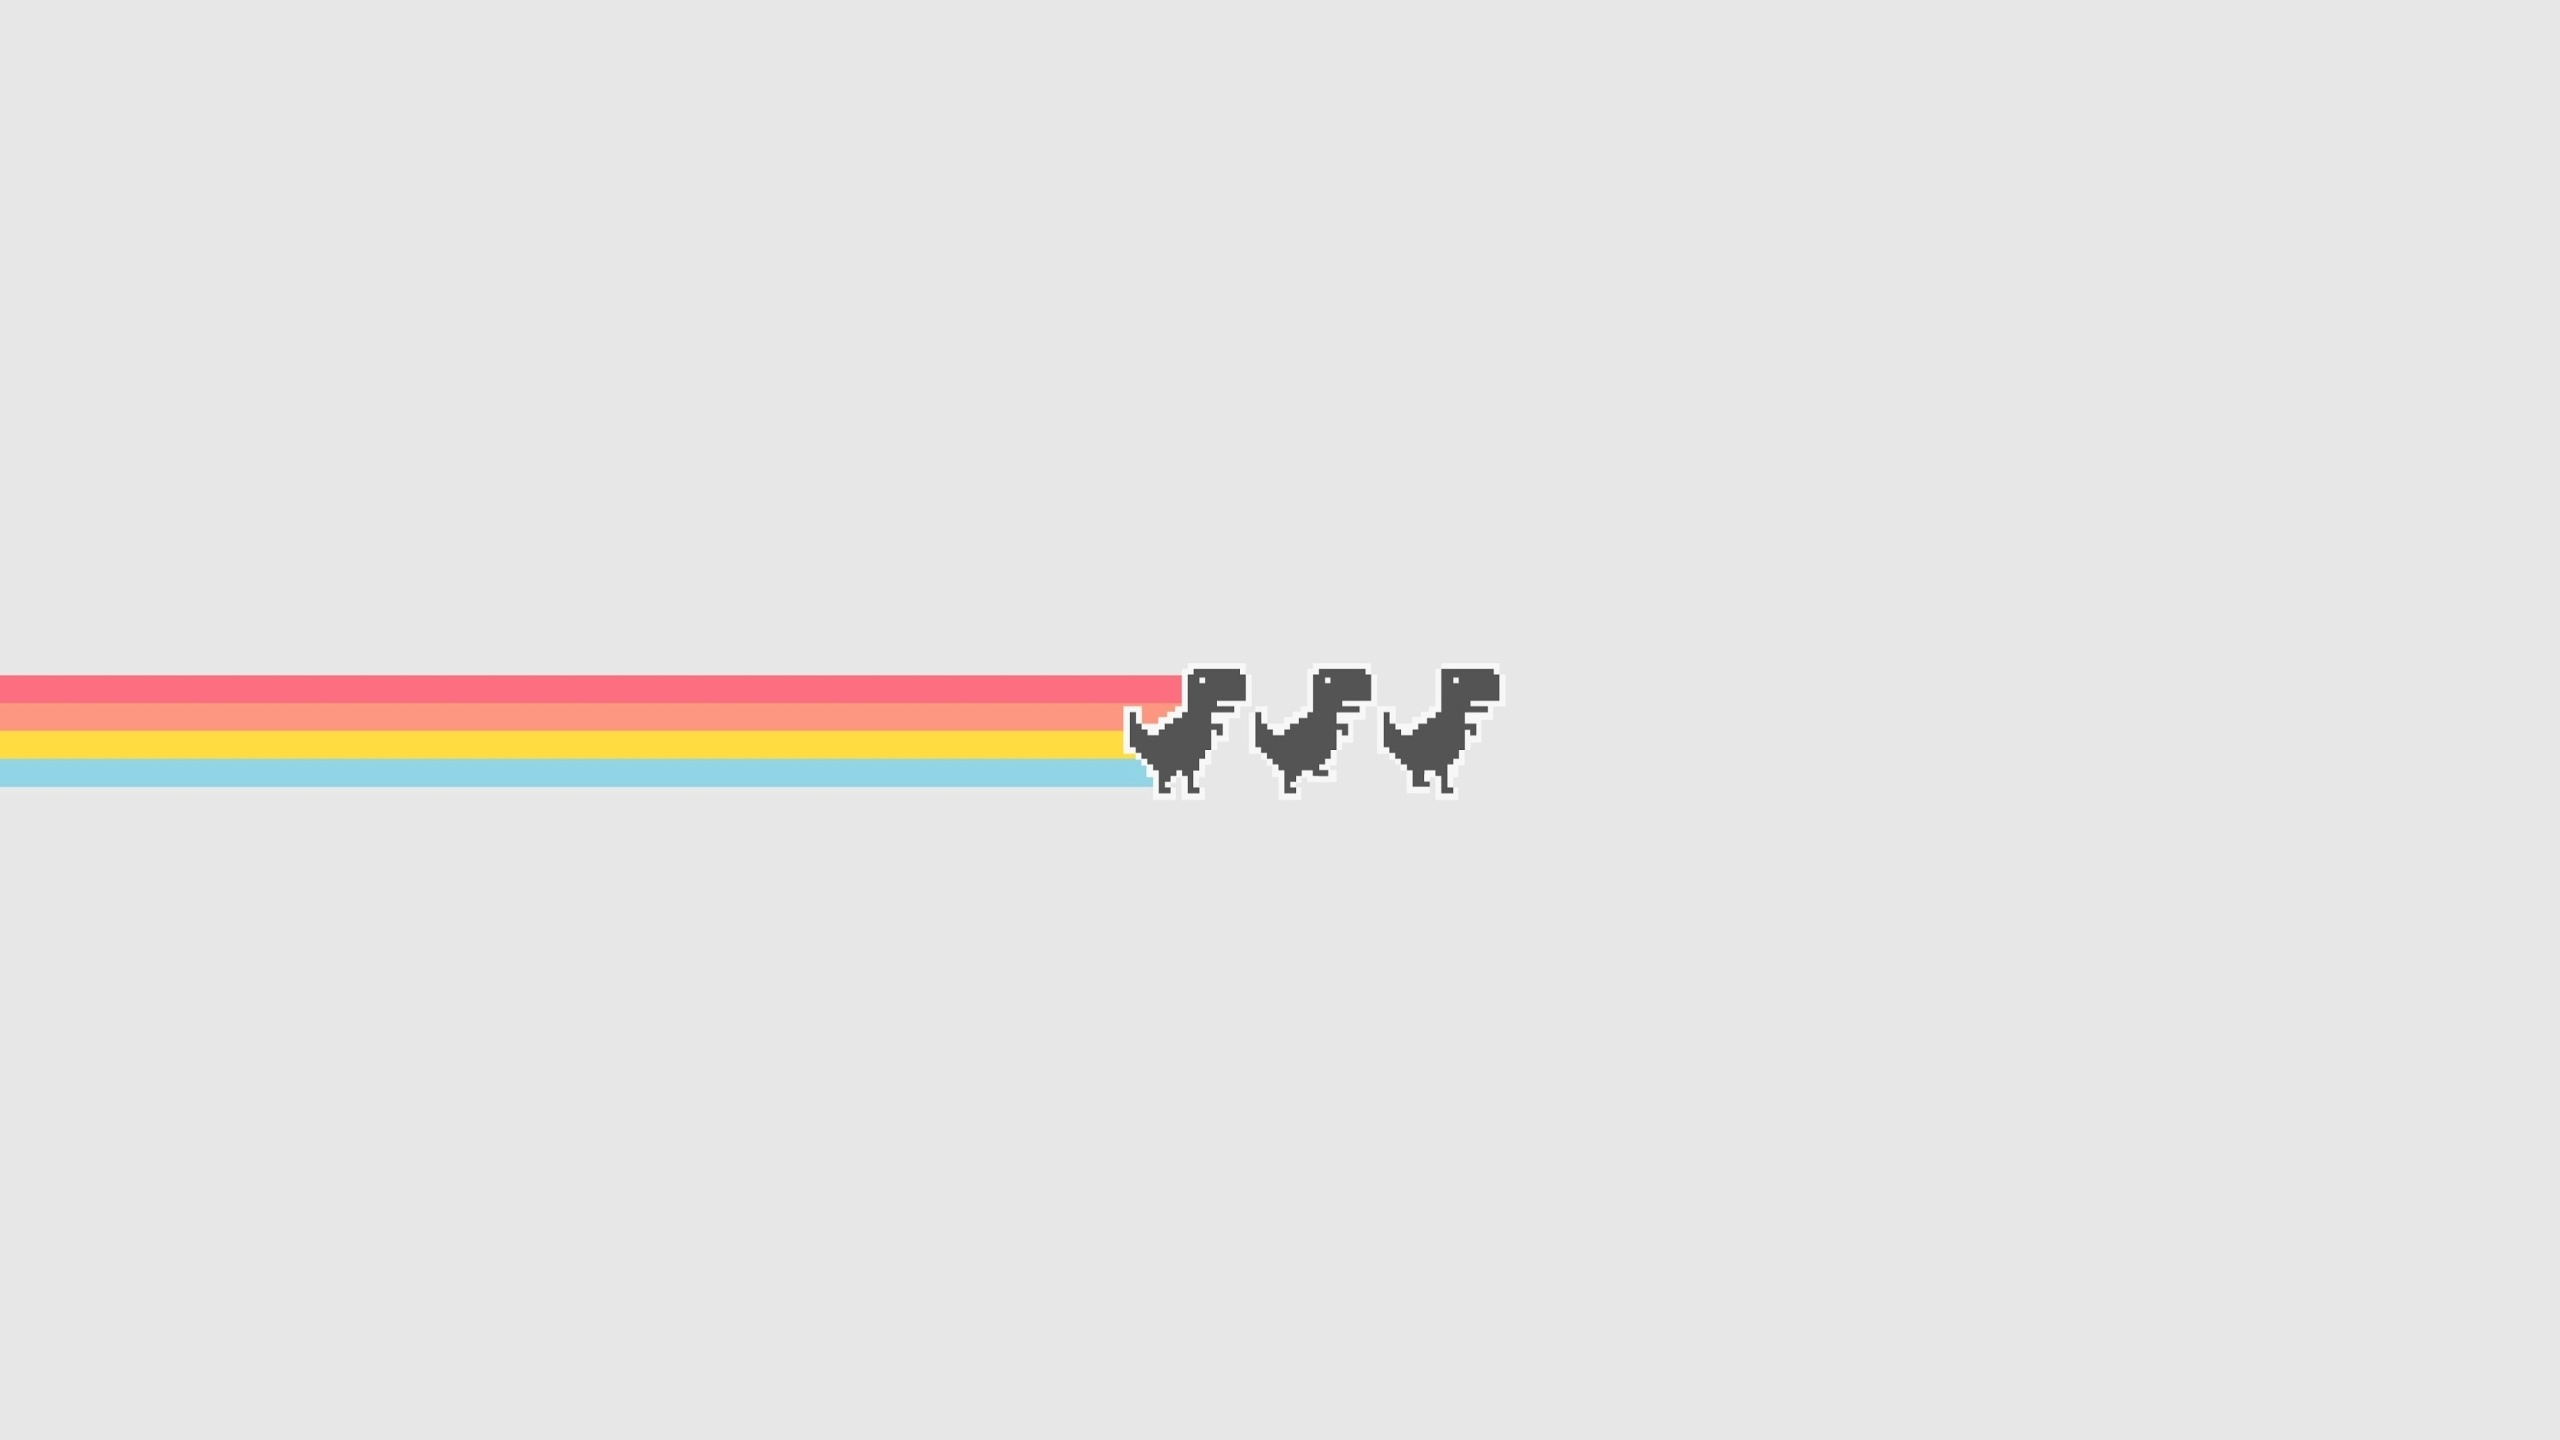 Download game, trex, the run, minimal 2560x1440 wallpaper, dual wide 16:9 2560x1440 HD image, background, 21421